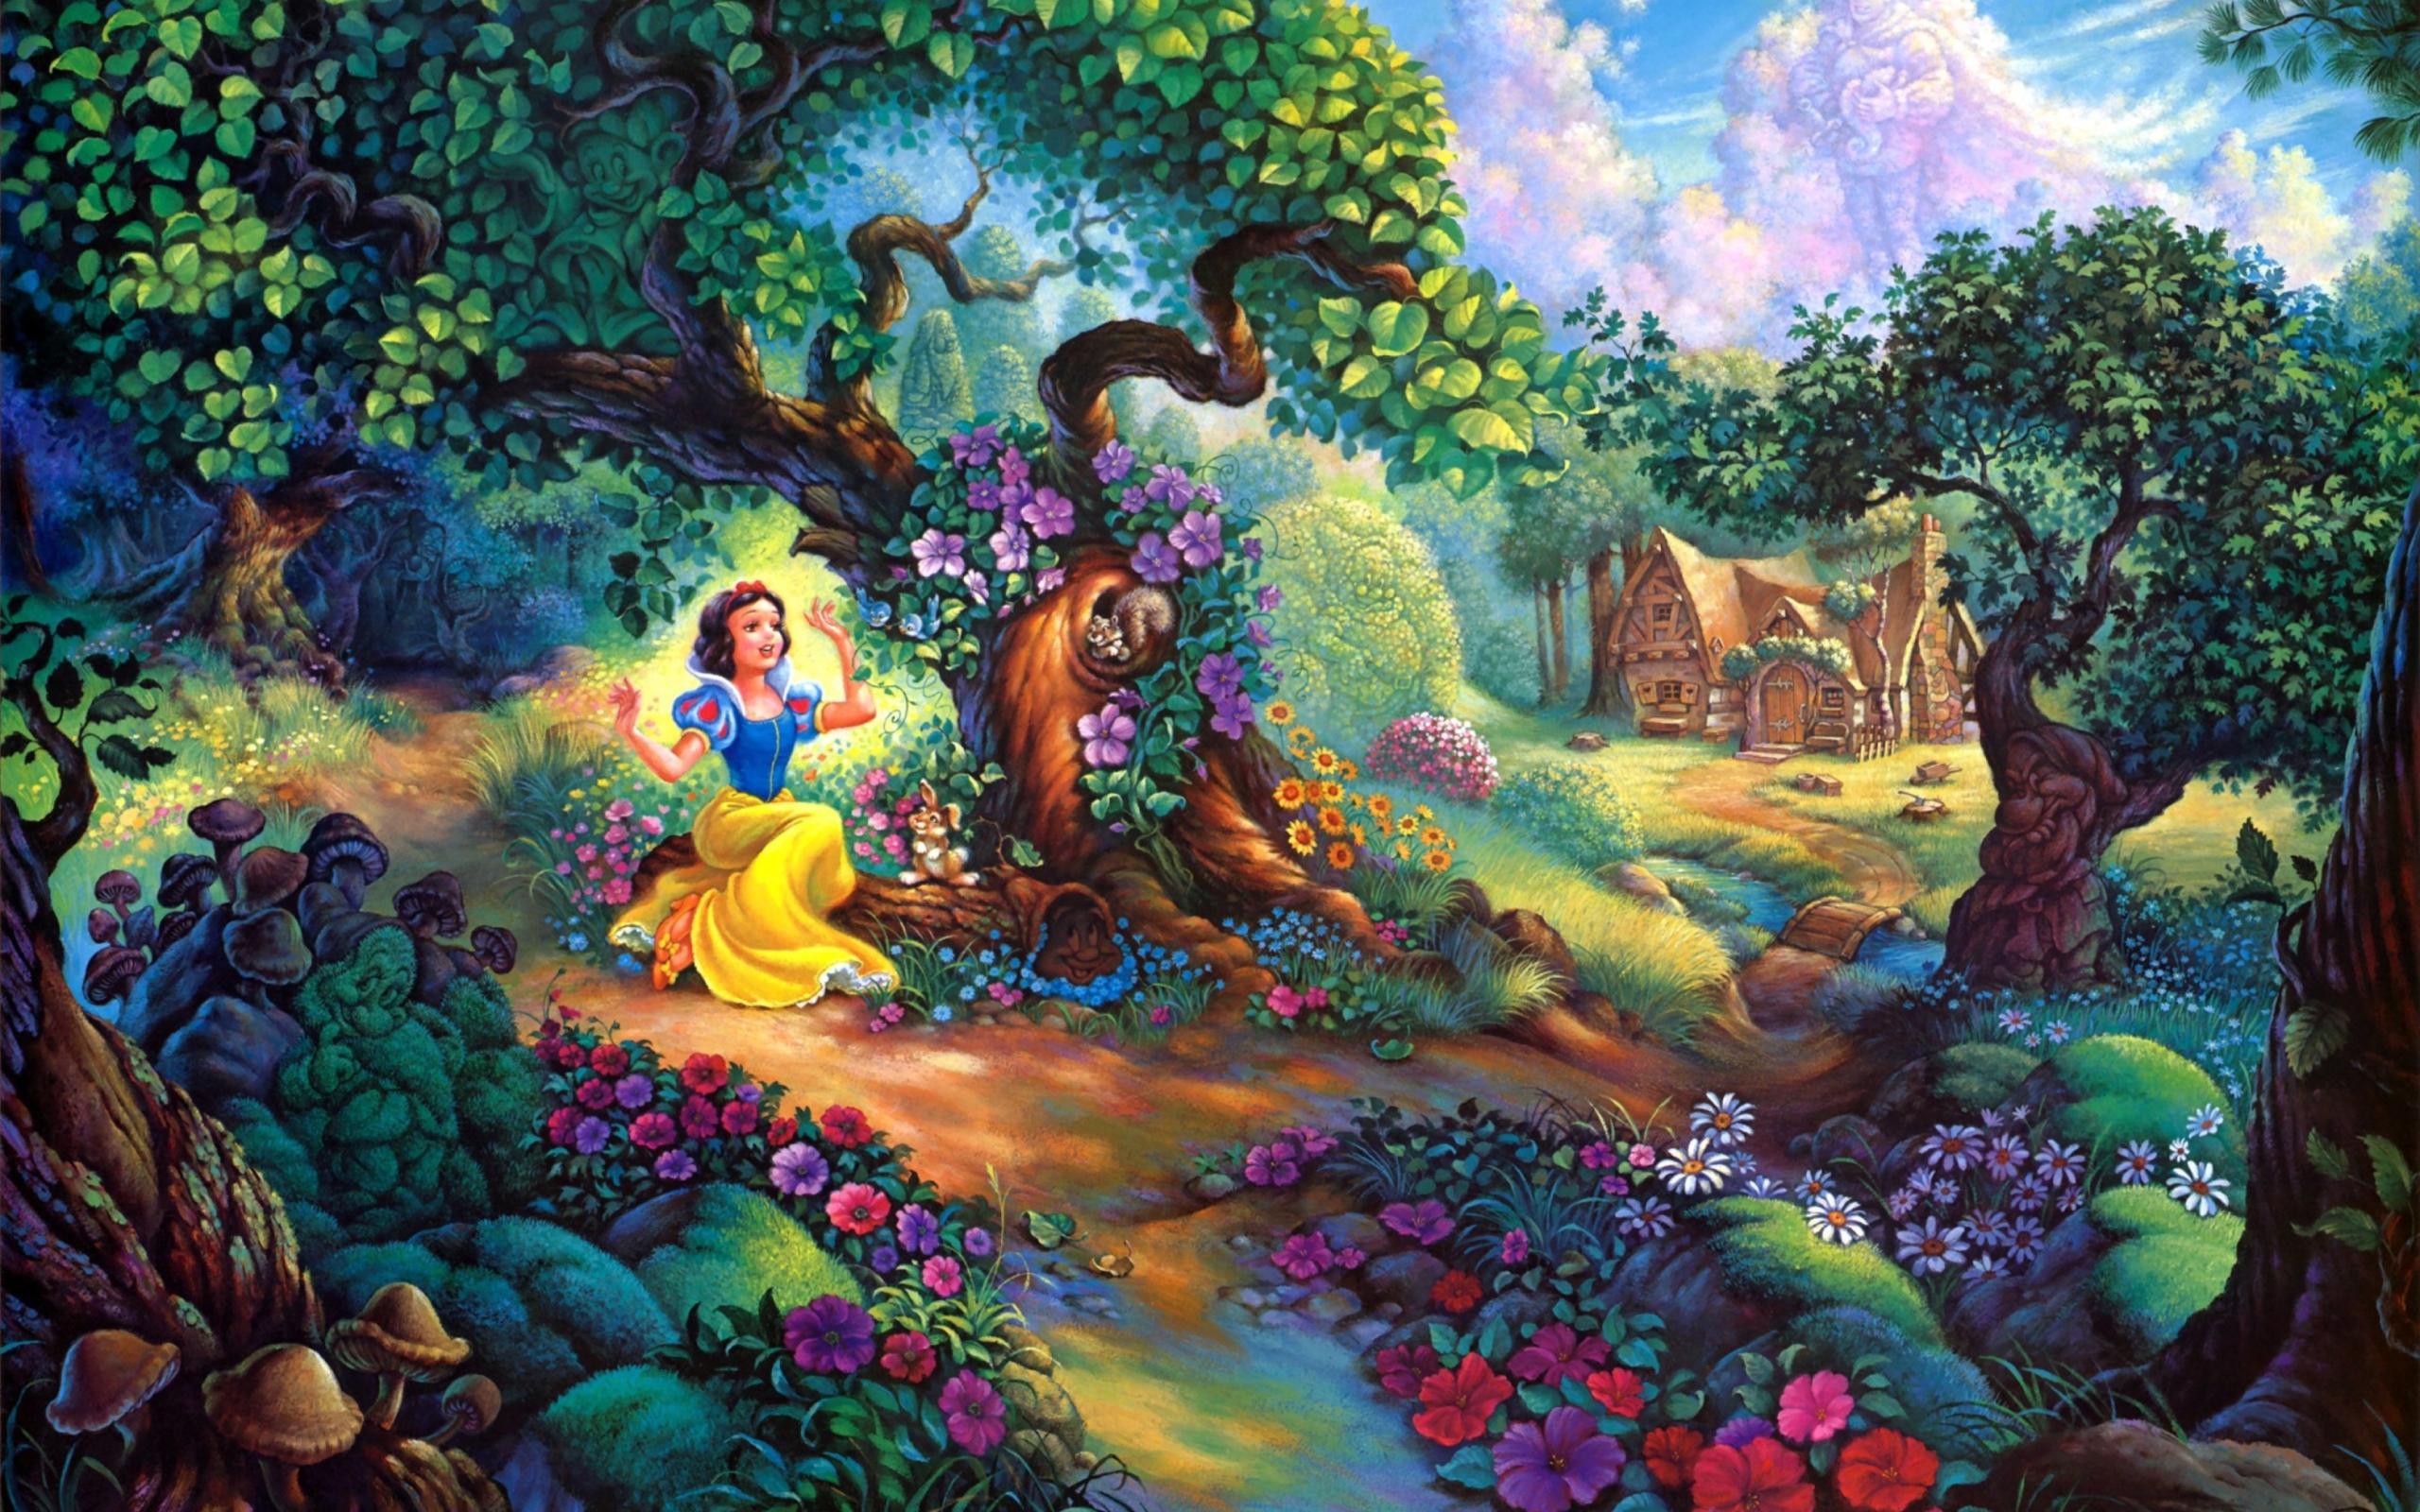 Snow White In Magical Forest wallpaper 2560x1600